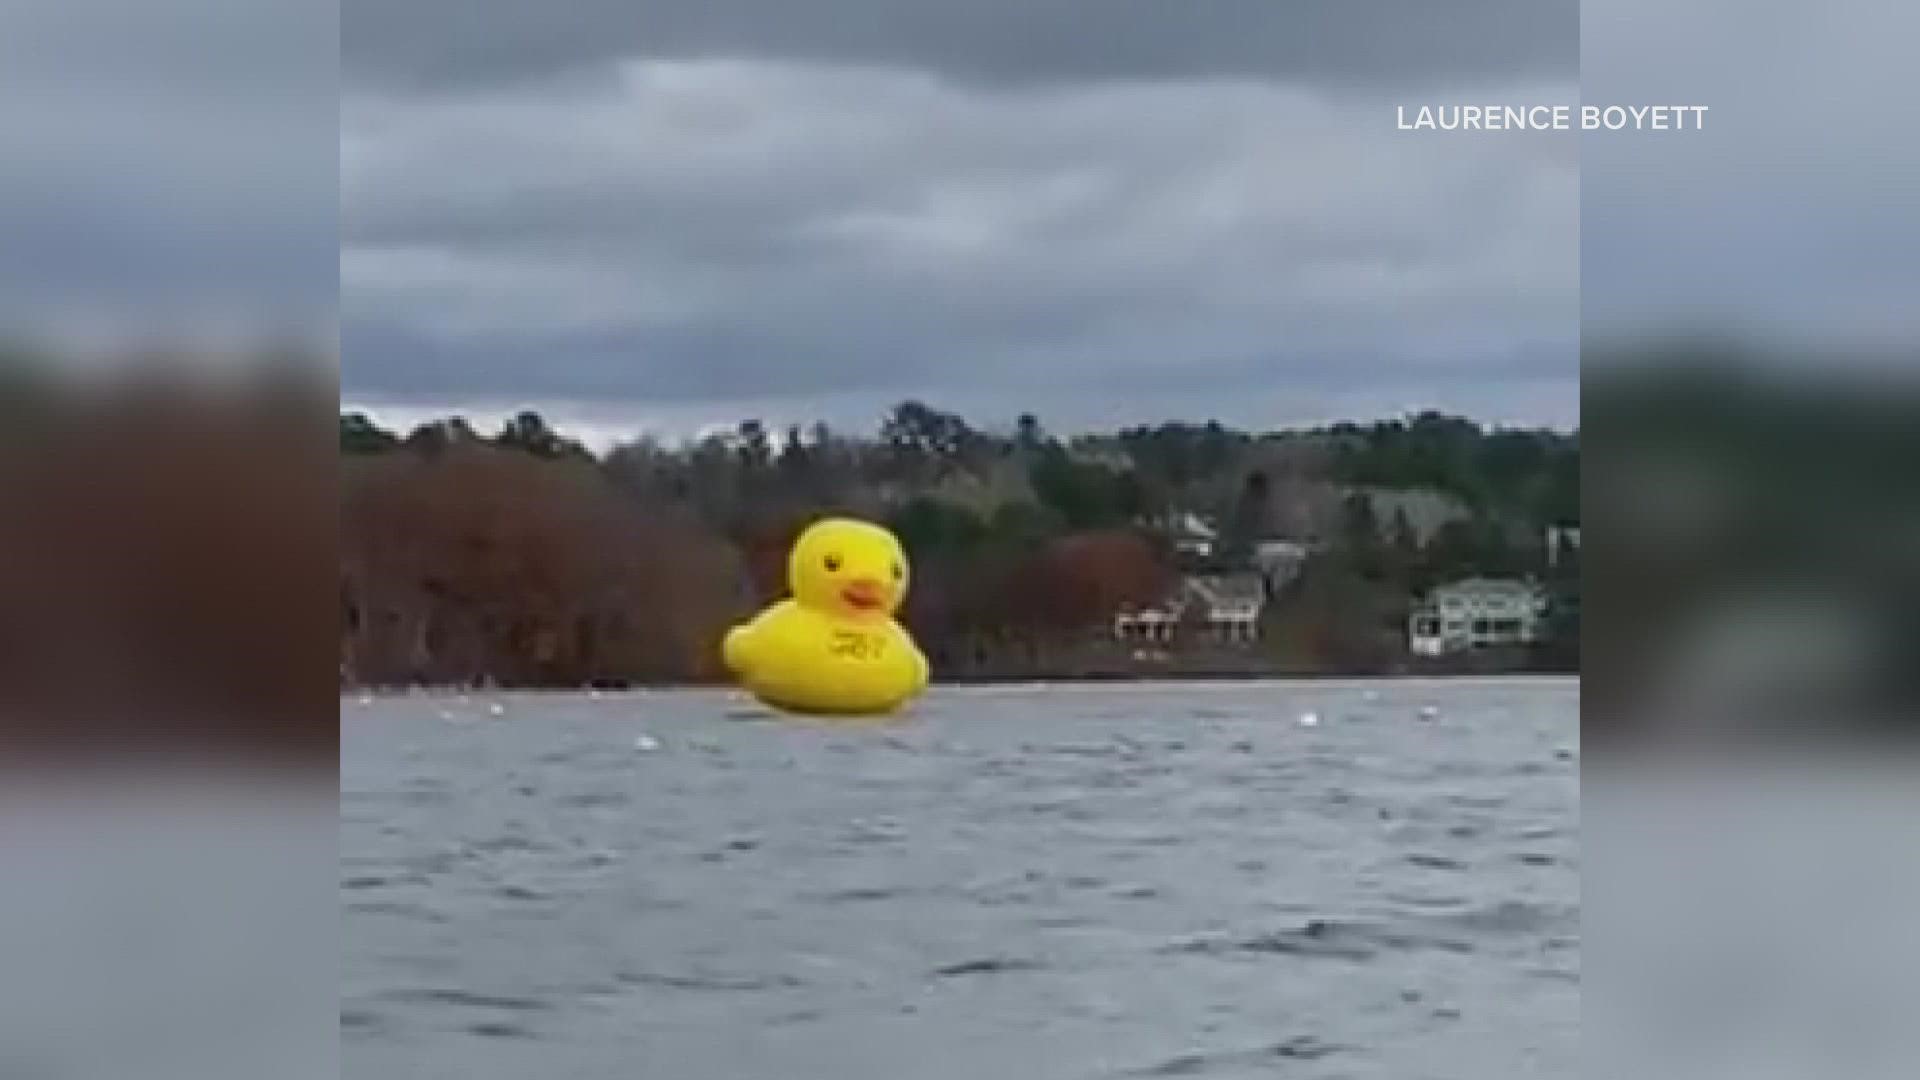 The giant duck broke free from its mooring and drifted away Thursday afternoon due to heavy winds.